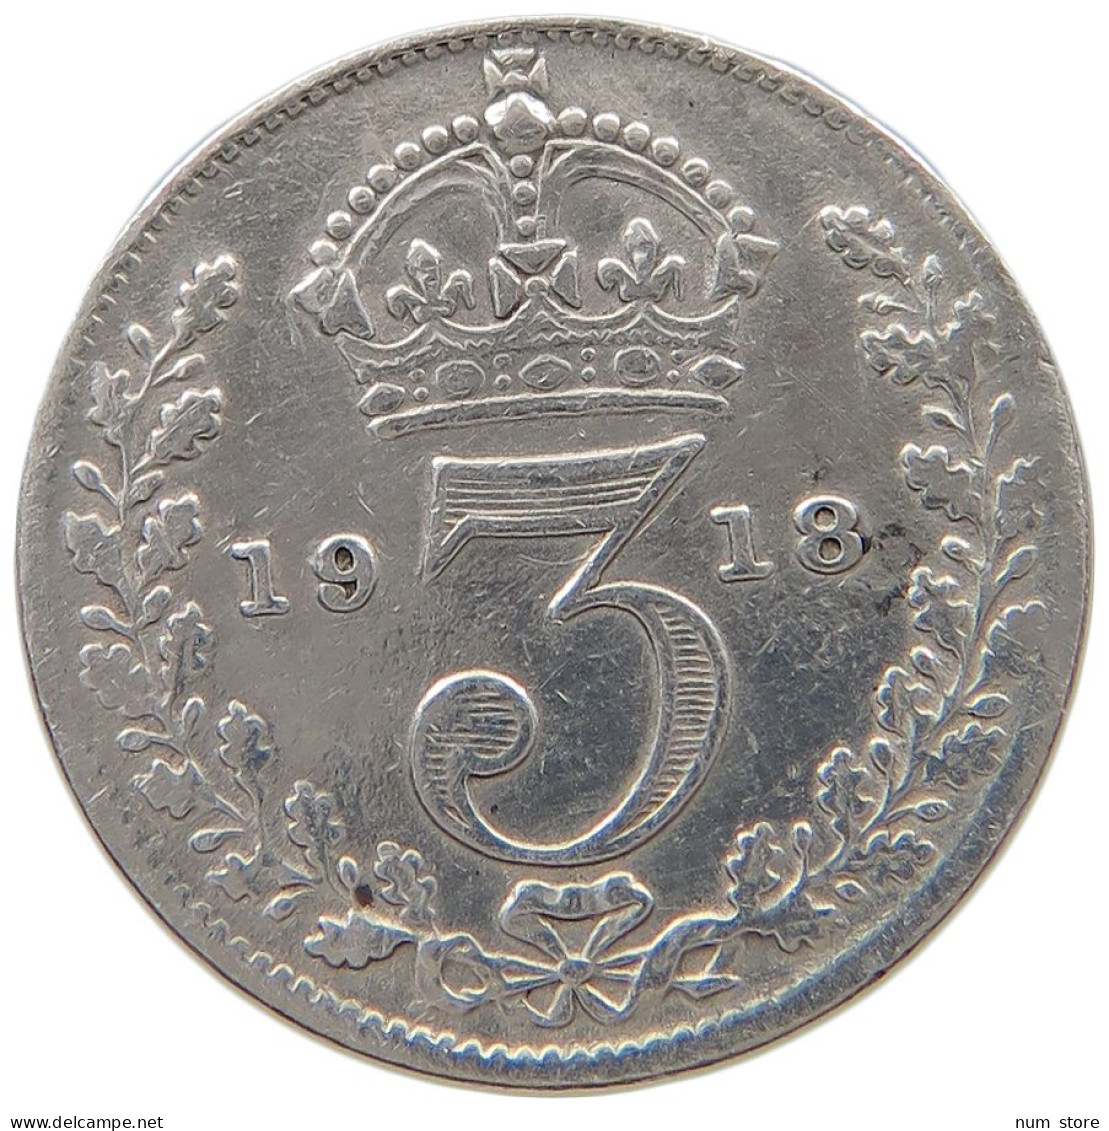 GREAT BRITAIN THREEPENCE 1918 George V. (1910-1936) #a052 0479 - F. 3 Pence